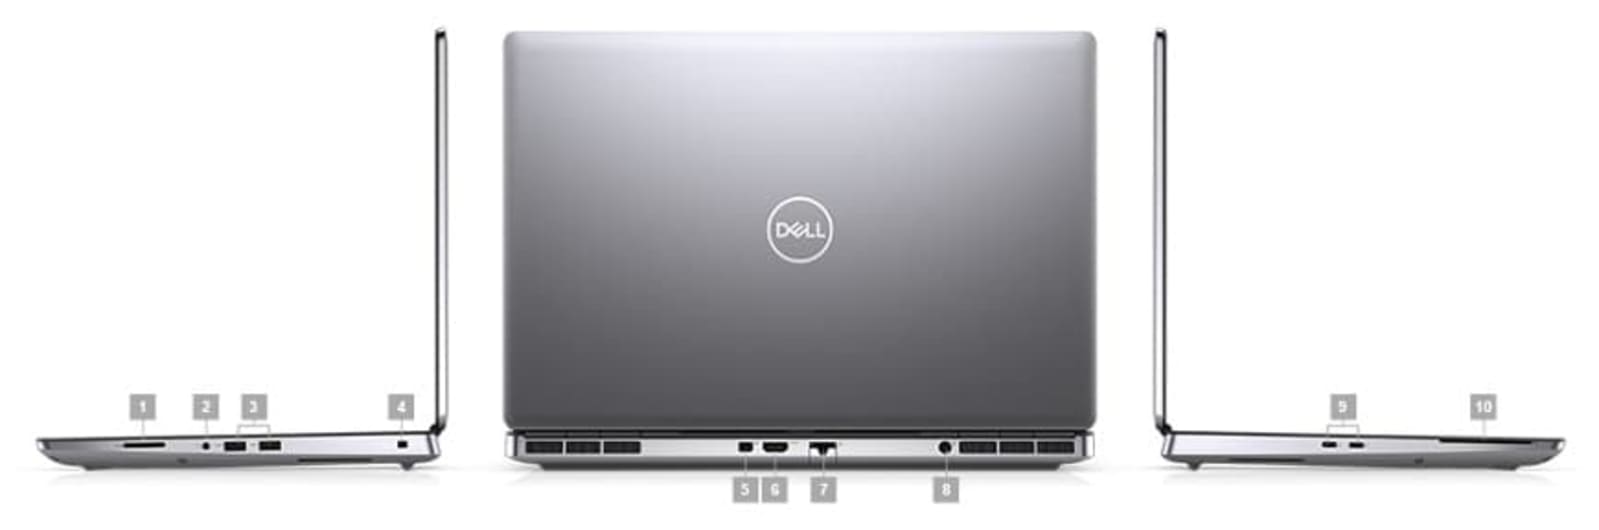 Restored Dell Precision 7000 7560 Workstation Laptop (2021) | 15.6" FHD Touch | Core i5 - 256GB SSD + 256GB SSD - 8GB RAM | 6 Cores @ 4.6 GHz - 11th Gen CPU (Refurbished) - image 3 of 11